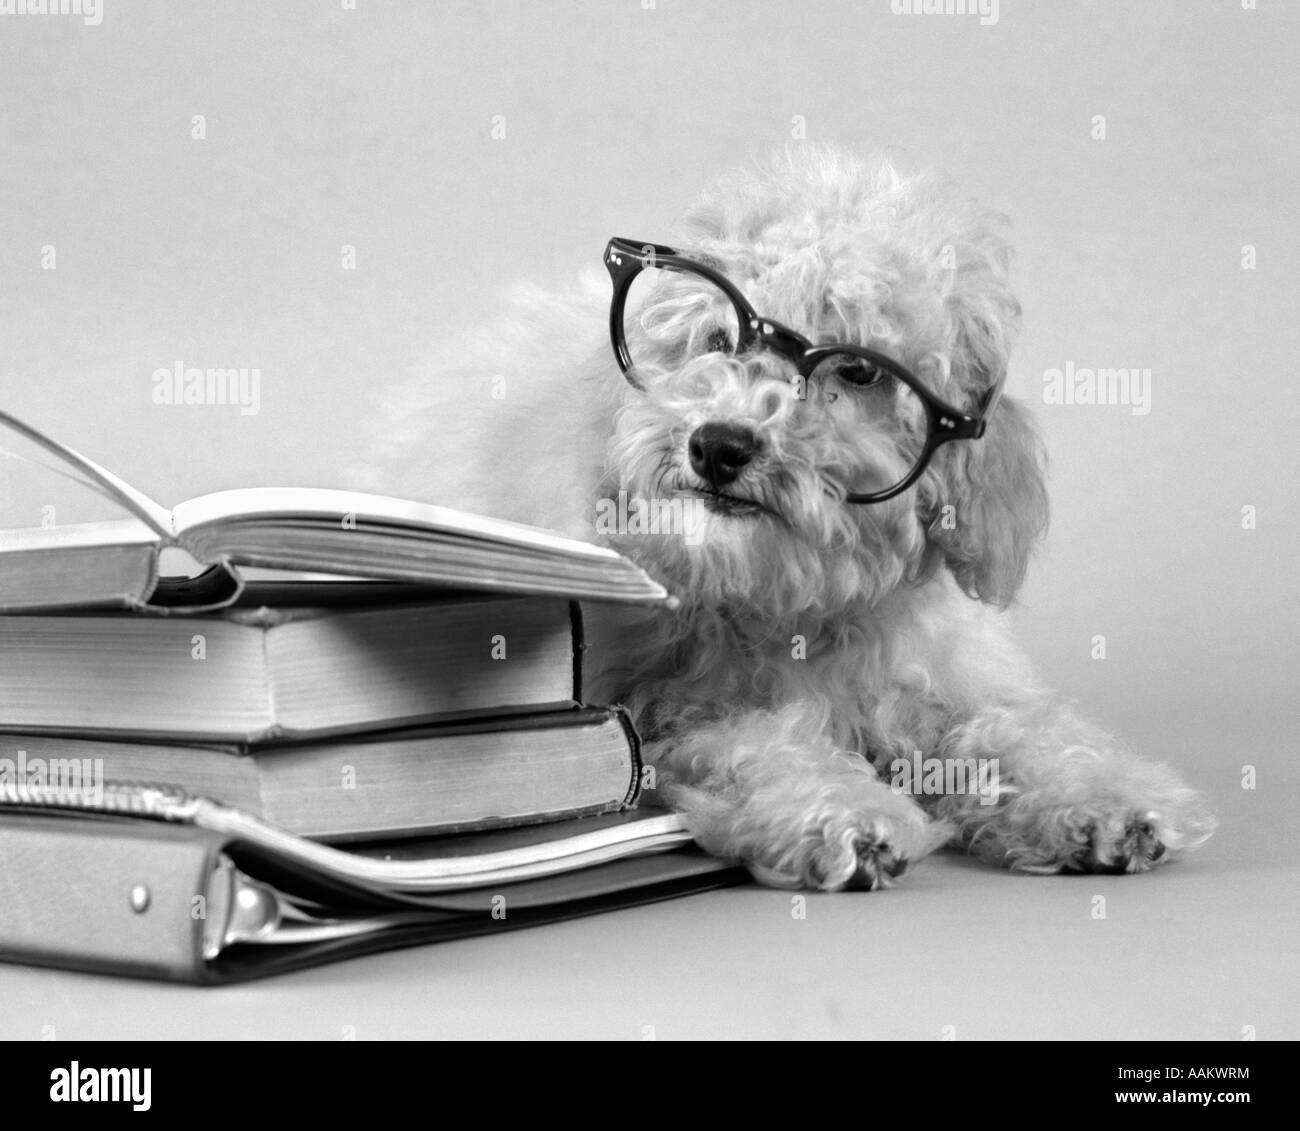 1950s WHITE POODLE WEARING BLACK EYE GLASSES SITTING BESIDE A PILE OF SCHOOL BOOKS Stock Photo